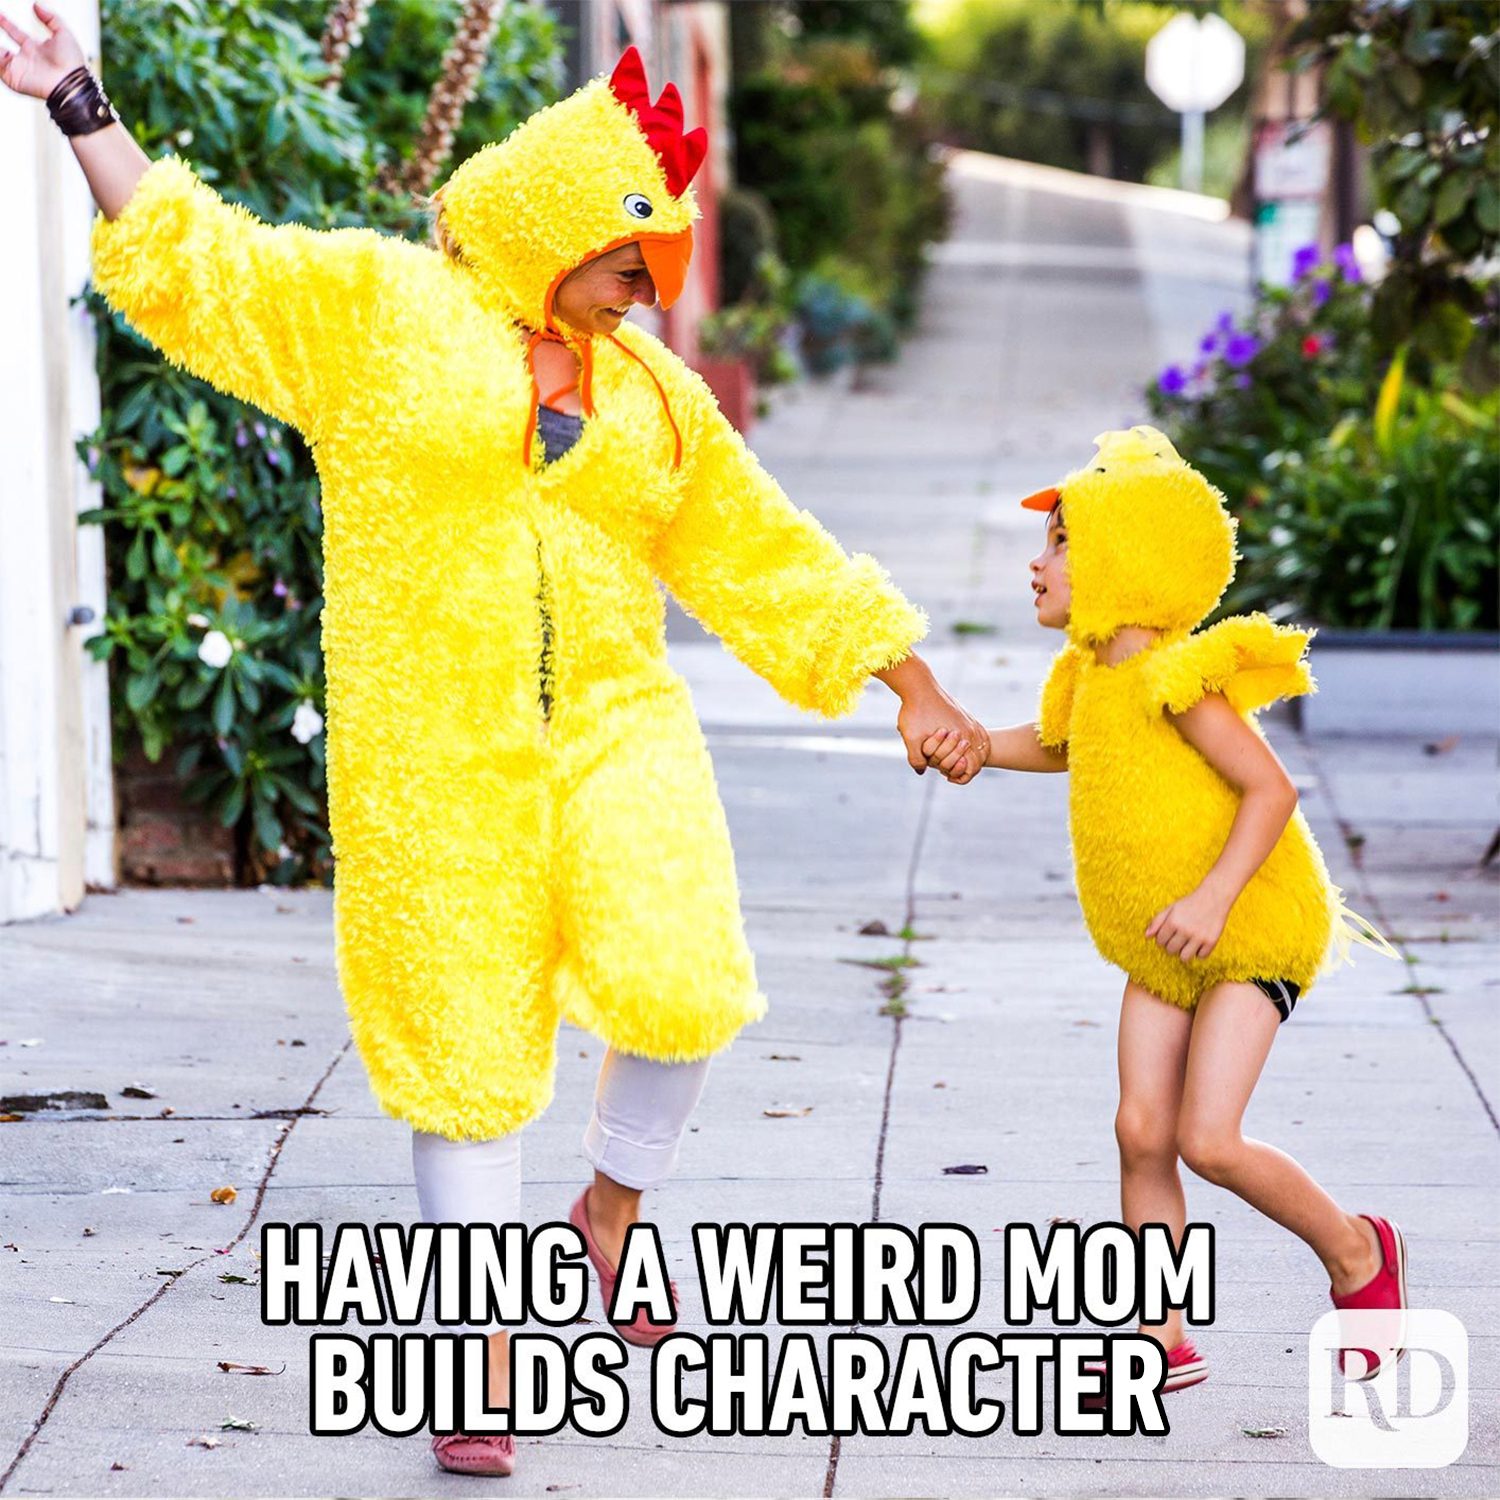 50 Funny Mom Memes to Share in 2023